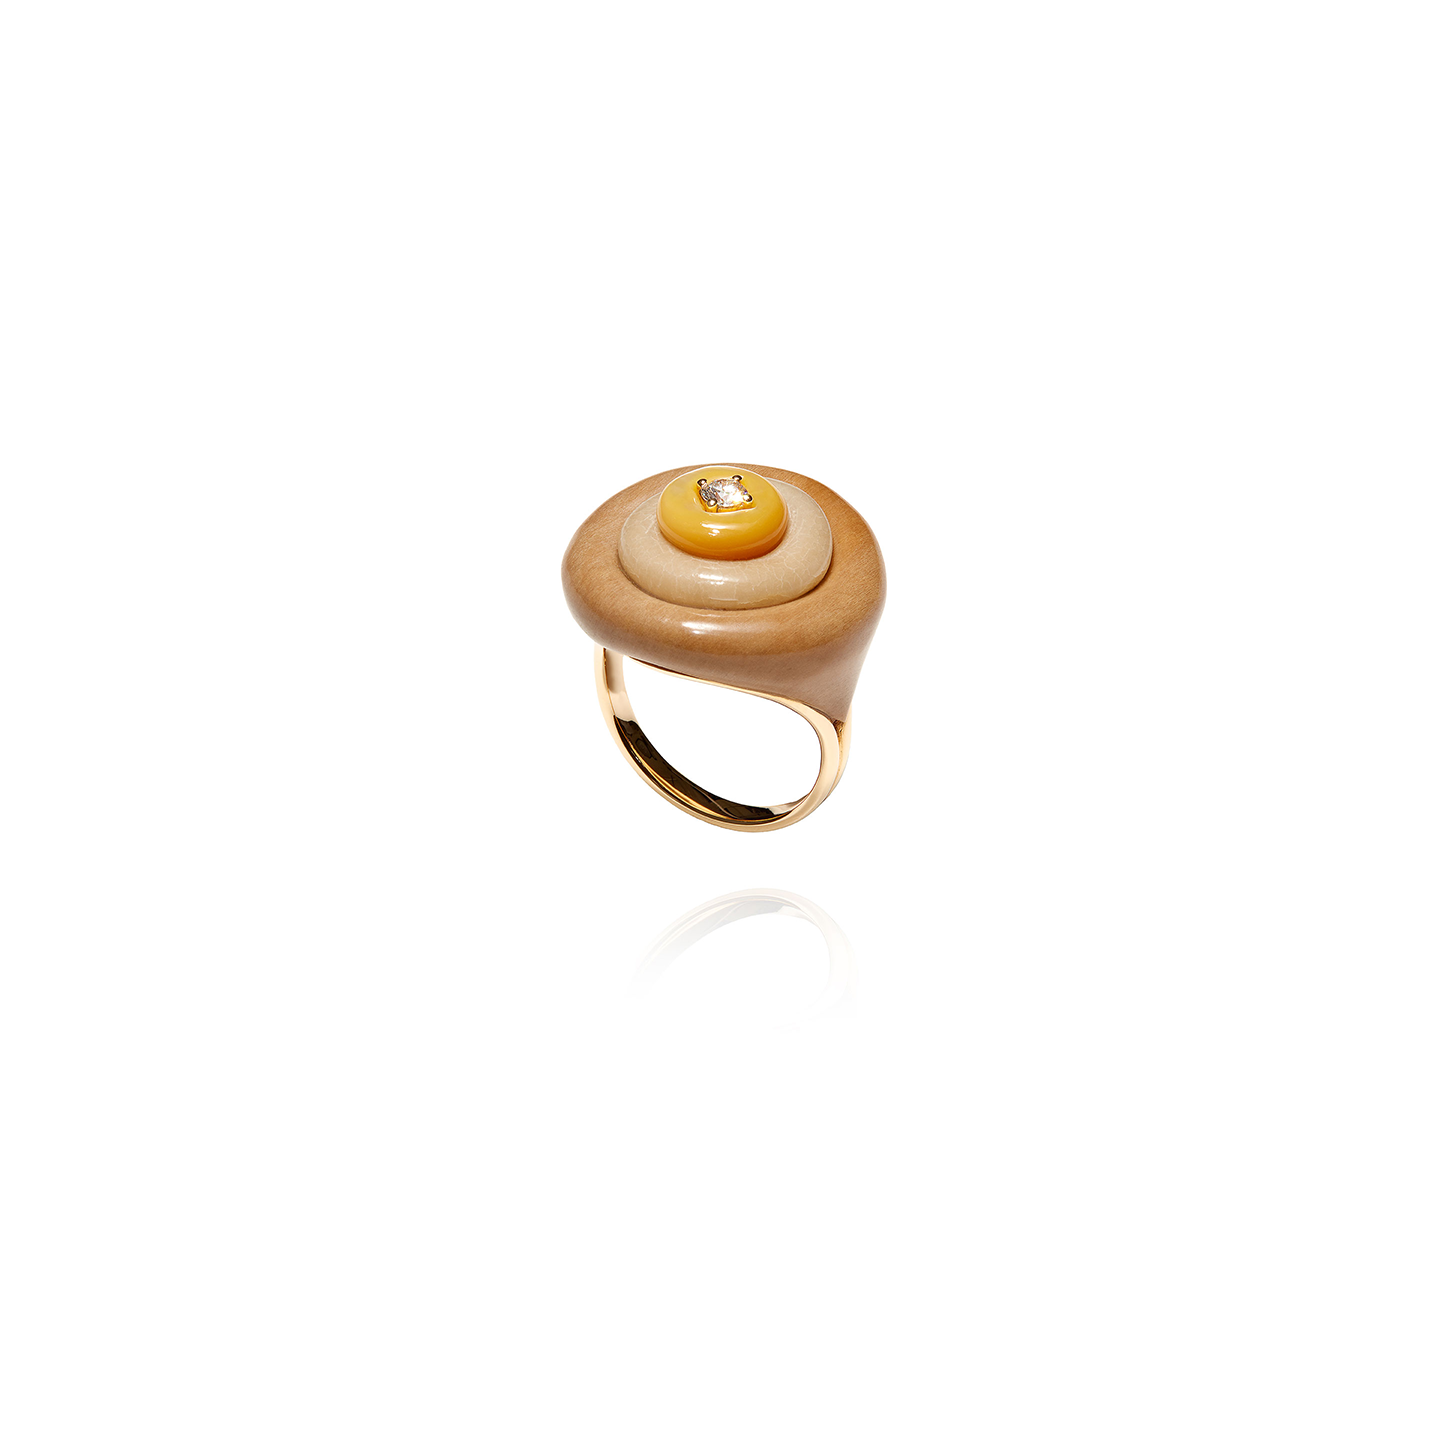 Fernando Jorge 'Surround' Signal Ring set with Petrified Wood, Tagua Seed and Mother-Of-Pearl